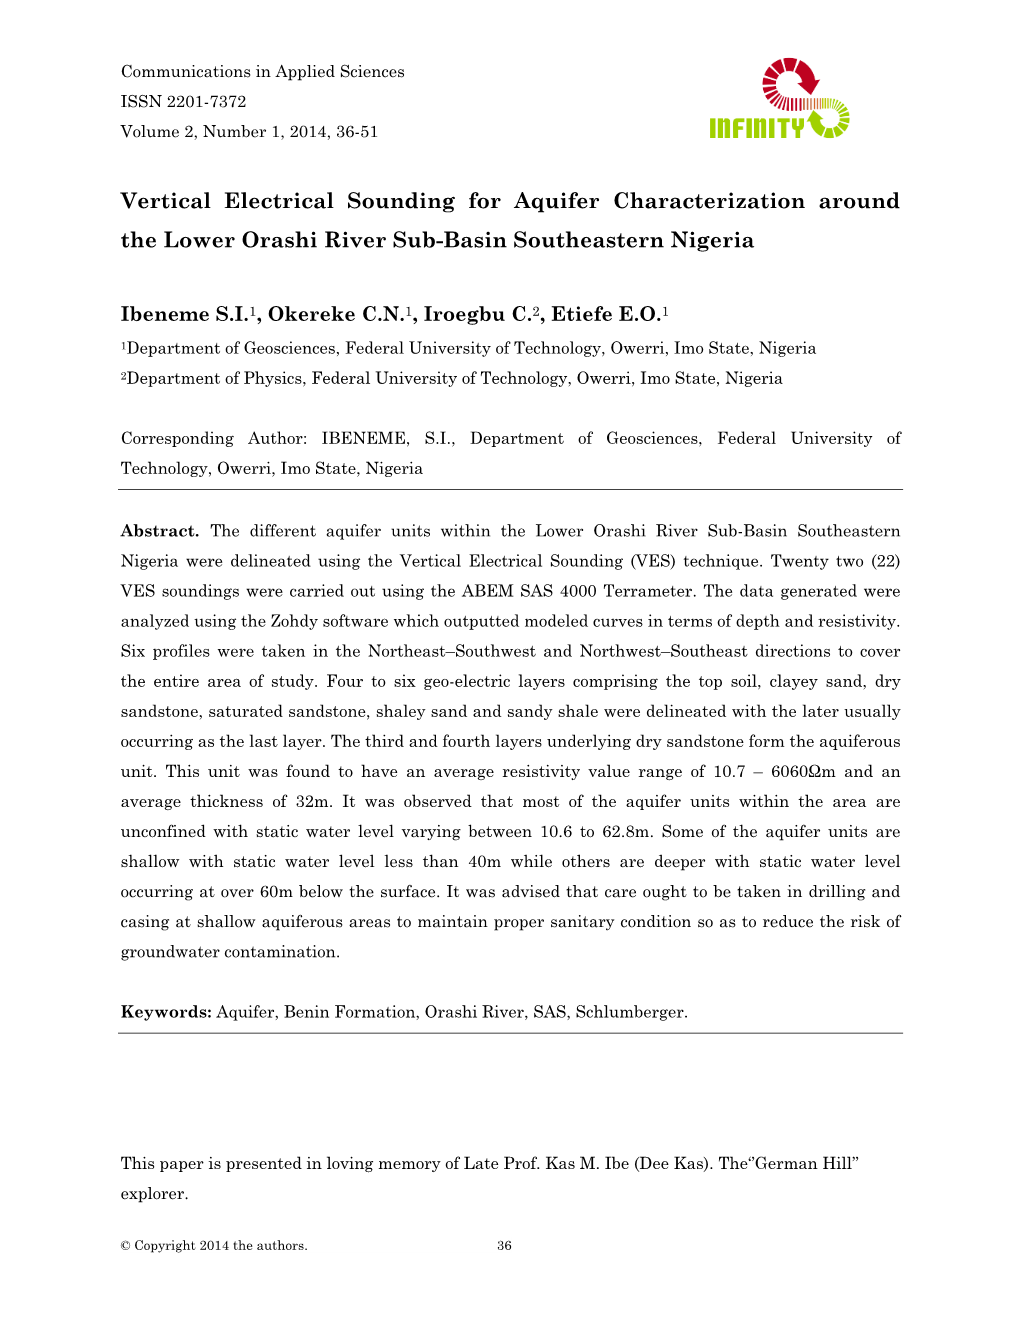 Vertical Electrical Sounding for Aquifer Characterization Around the Lower Orashi River Sub-Basin Southeastern Nigeria